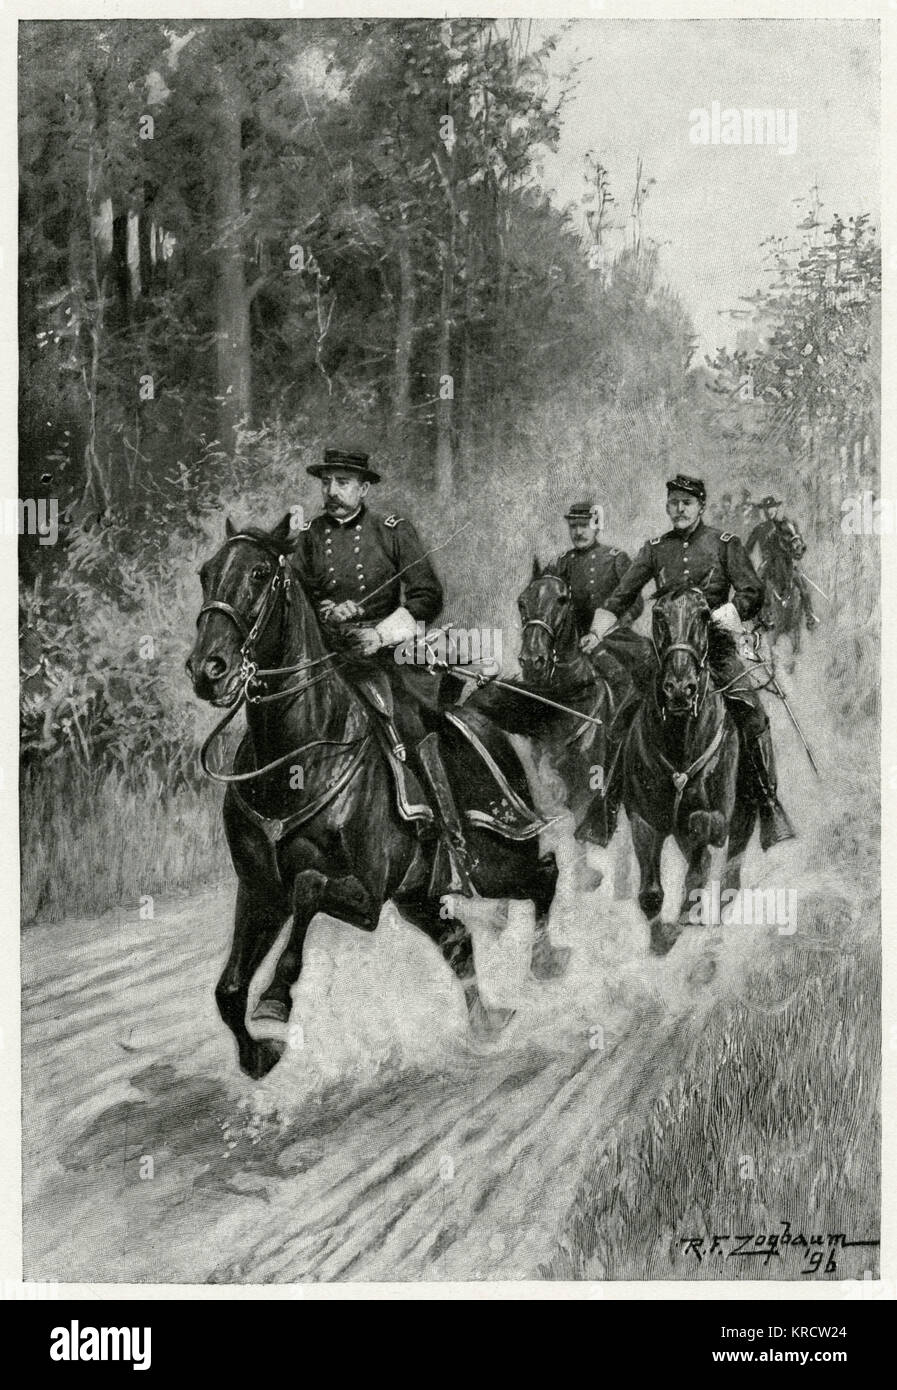 Philip Henry Sheridan, US General, given command of the Army of the Shenandoah, he defeats General Lee. Here he advances at a good pace on horseback with his men. Date: 1864 Stock Photo